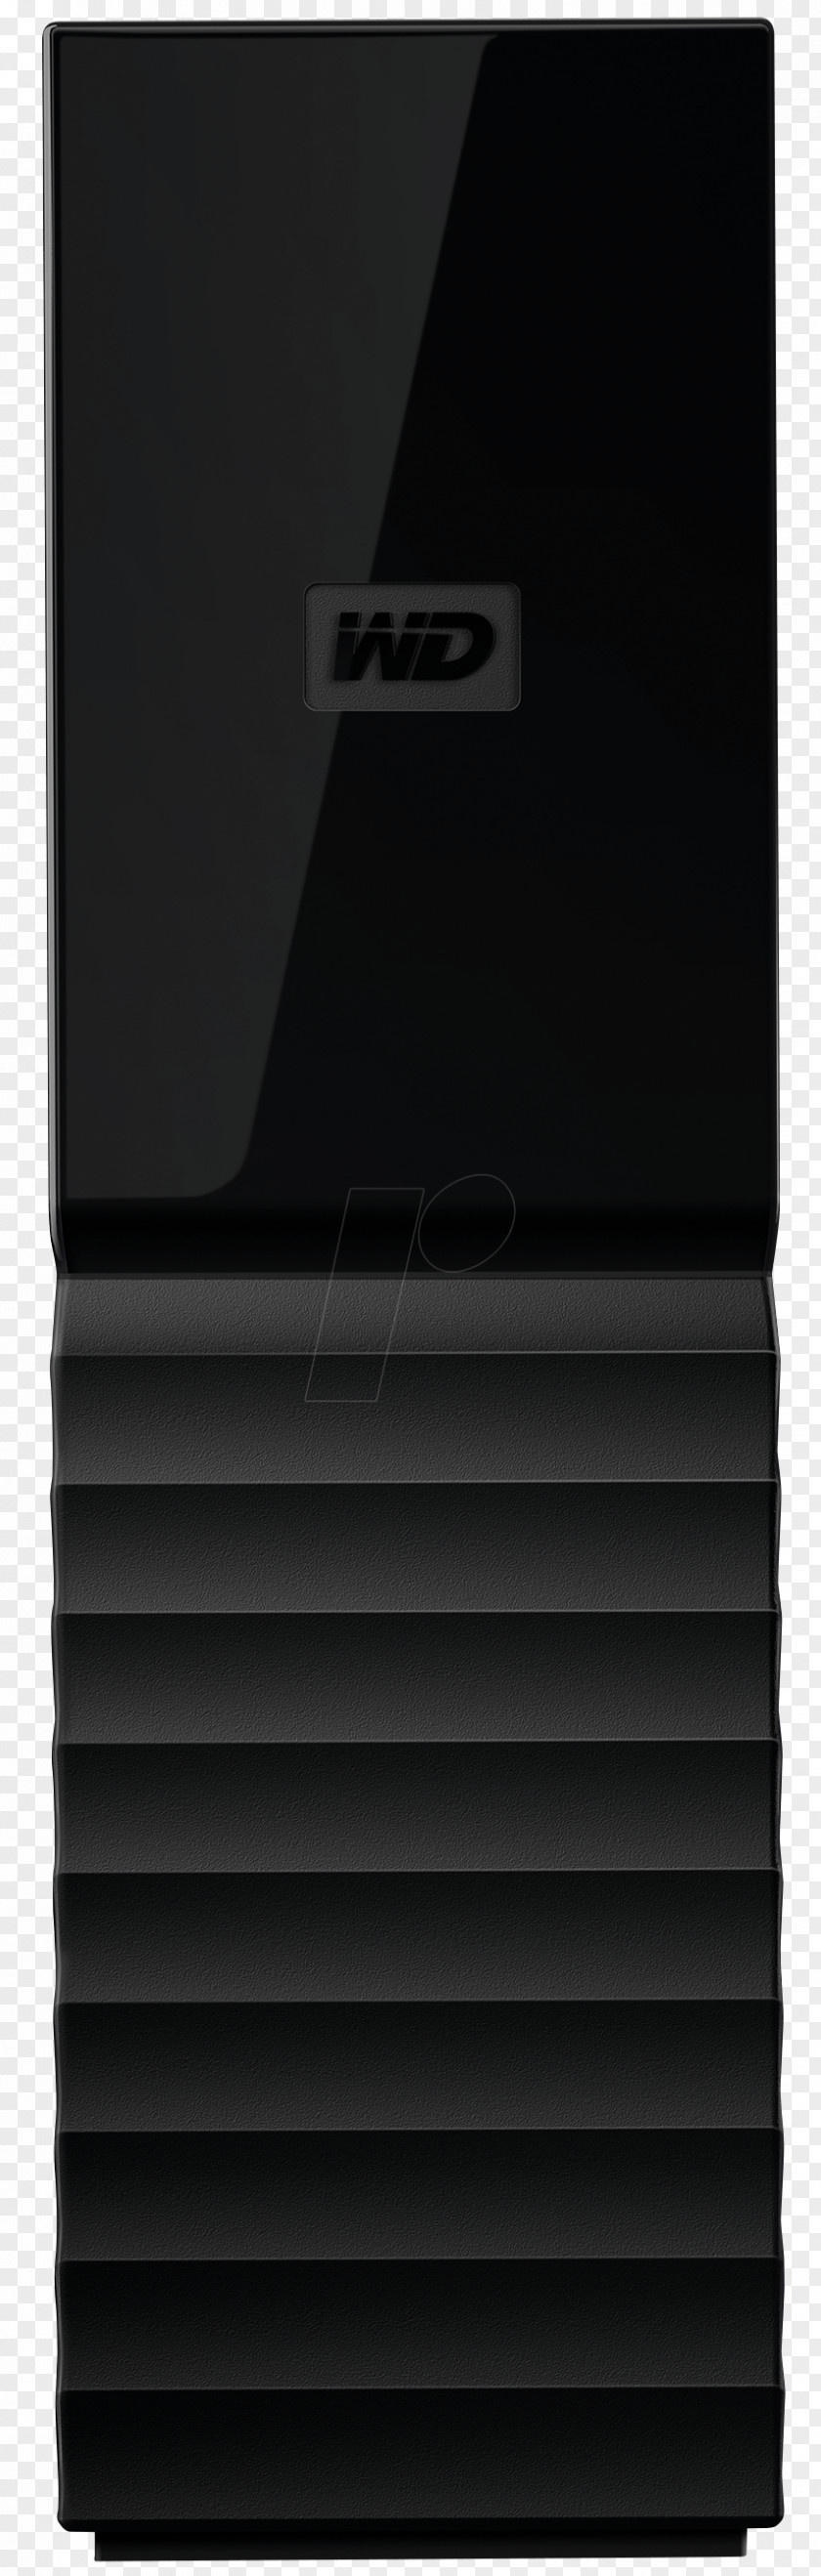 Hard Disk Technology Rectangle PNG